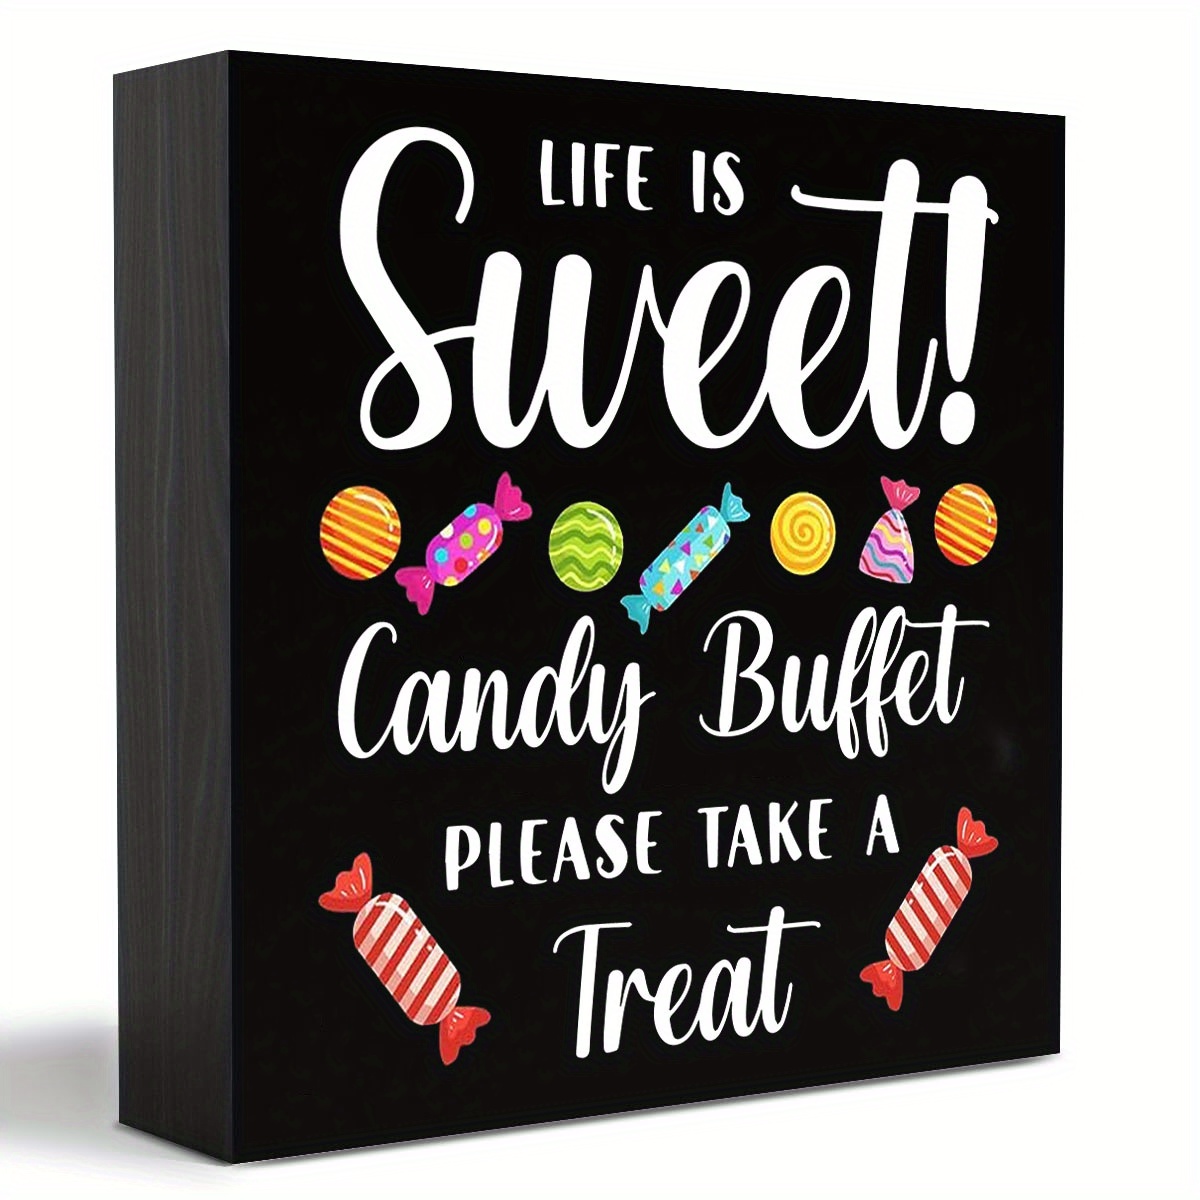 

1pc, Funny Candy Buffet Wooden Box Sign Plaque Life Is Sweet Candy Buffet Please Take A Treat Wood Box Sign Rustic Art Home Shelf Desk Decor